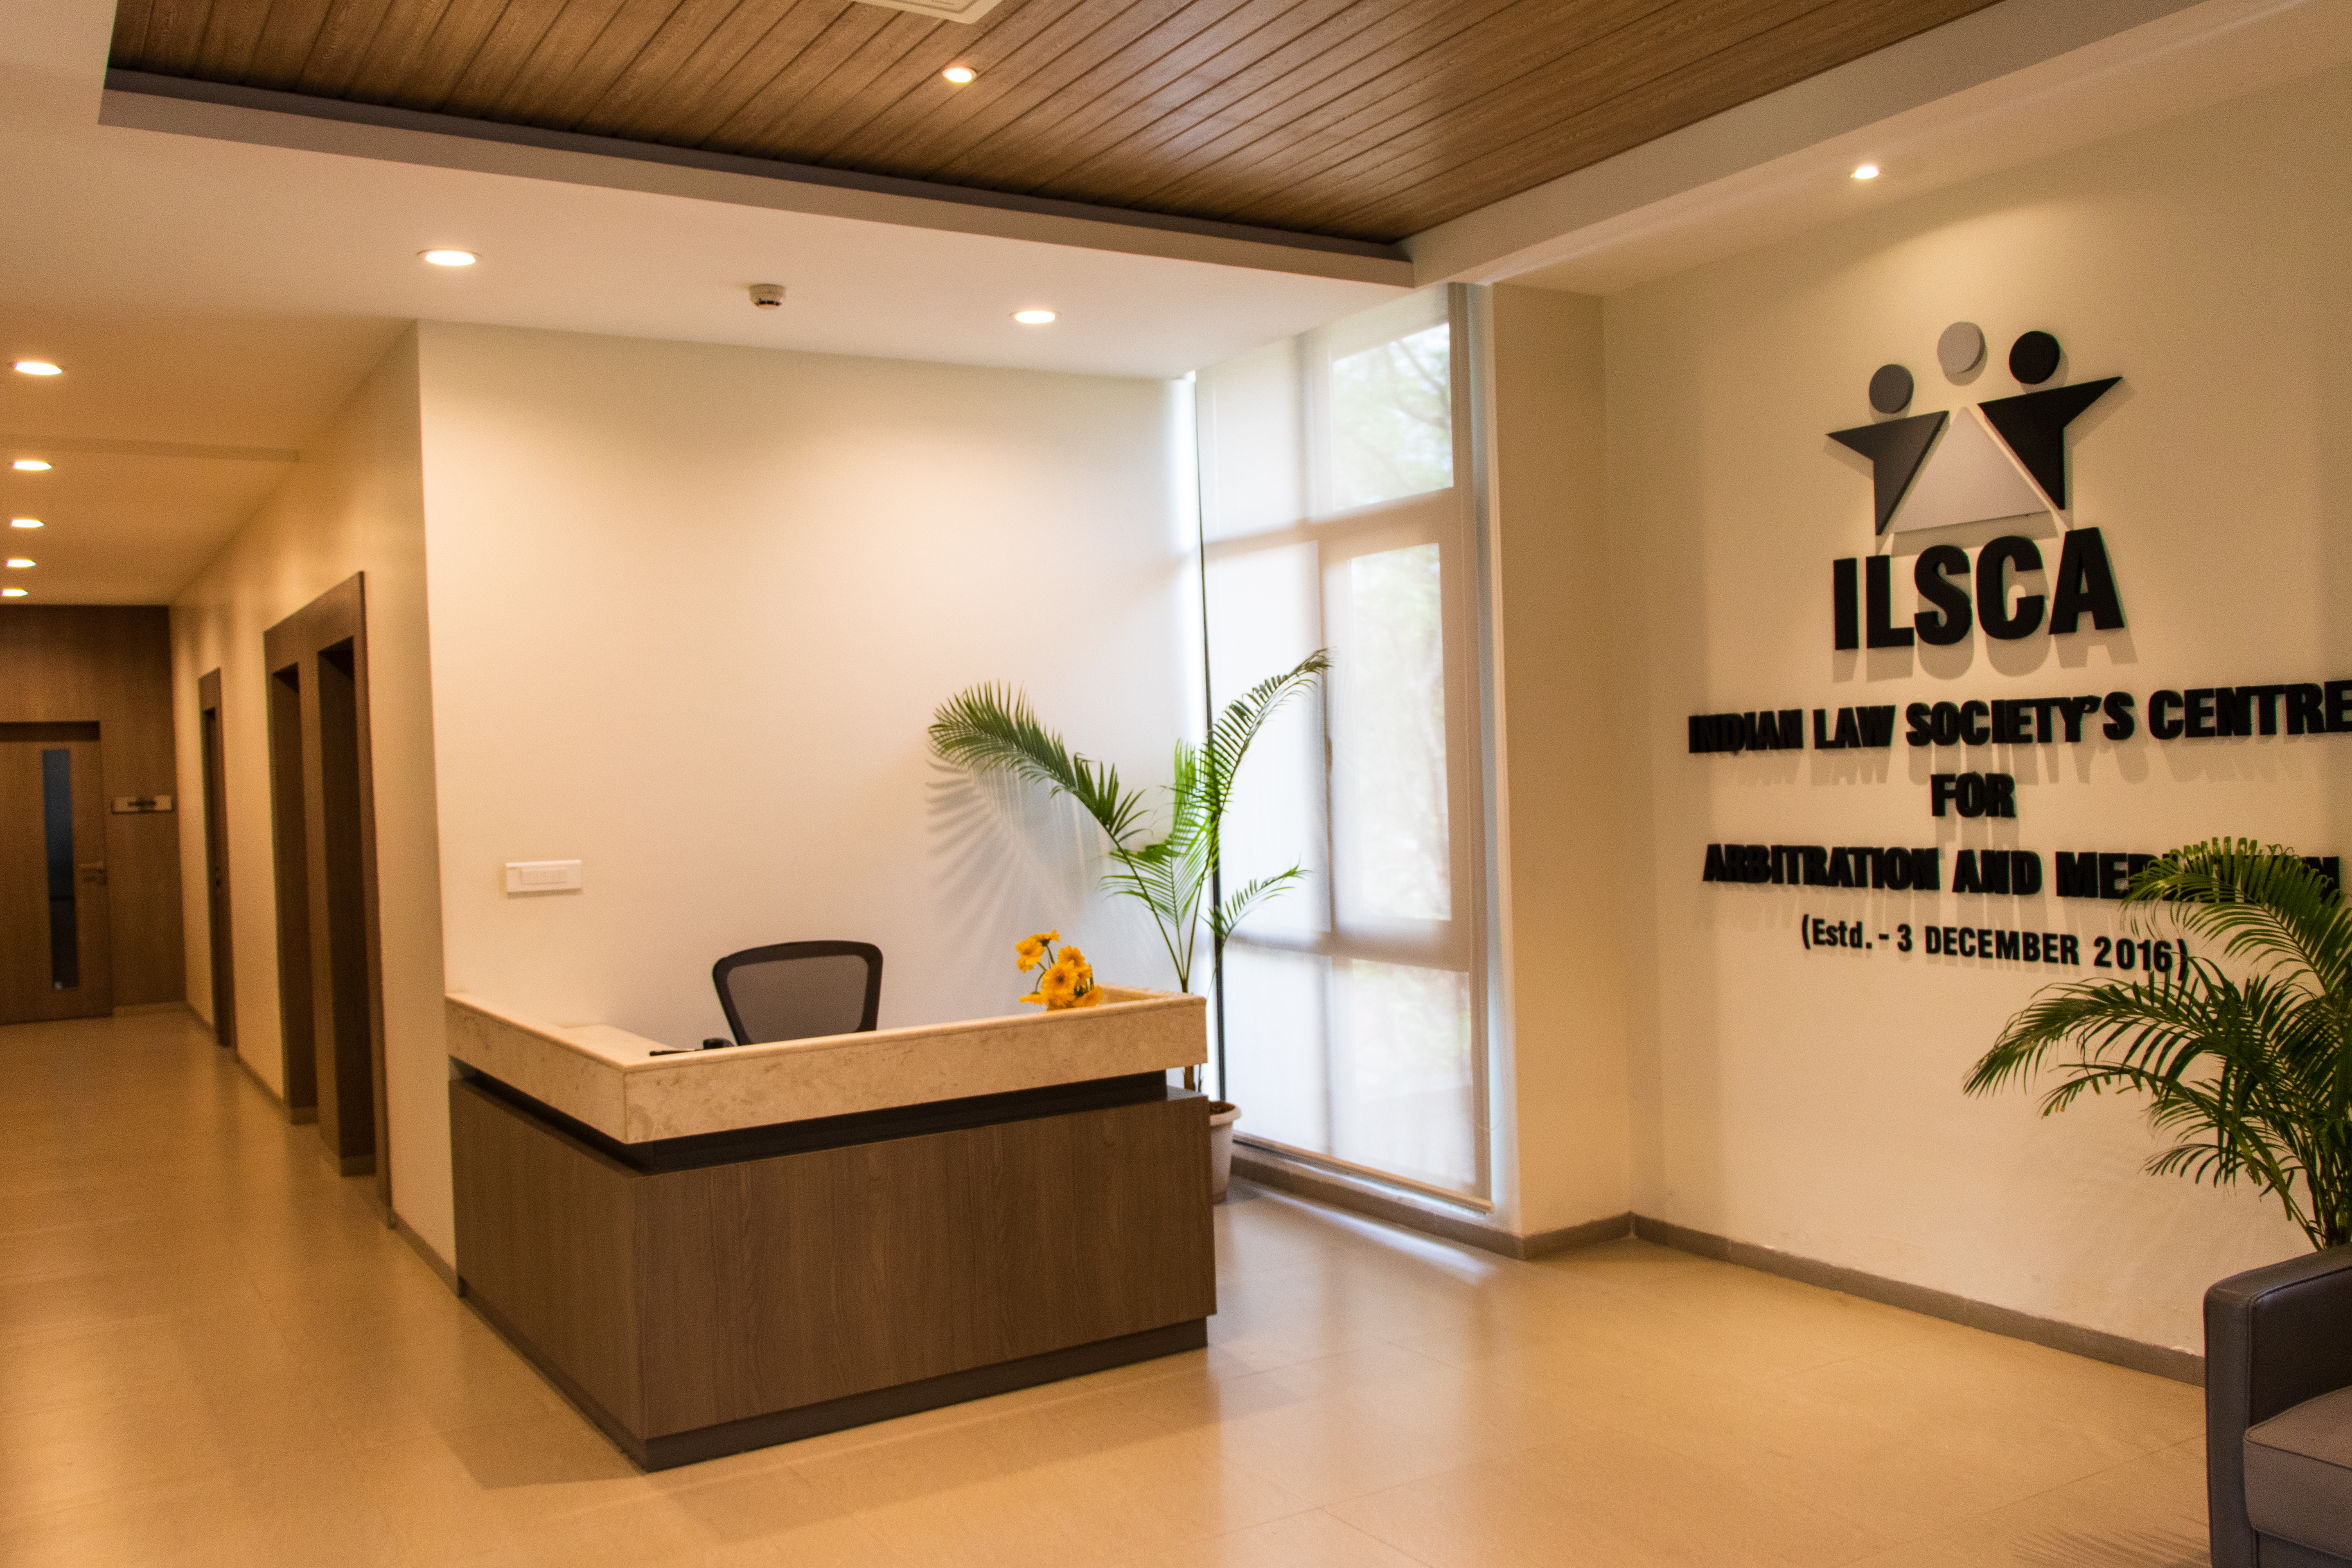 Indian Law Society’s Centre for Arbitration and Mediation (ILSCA)